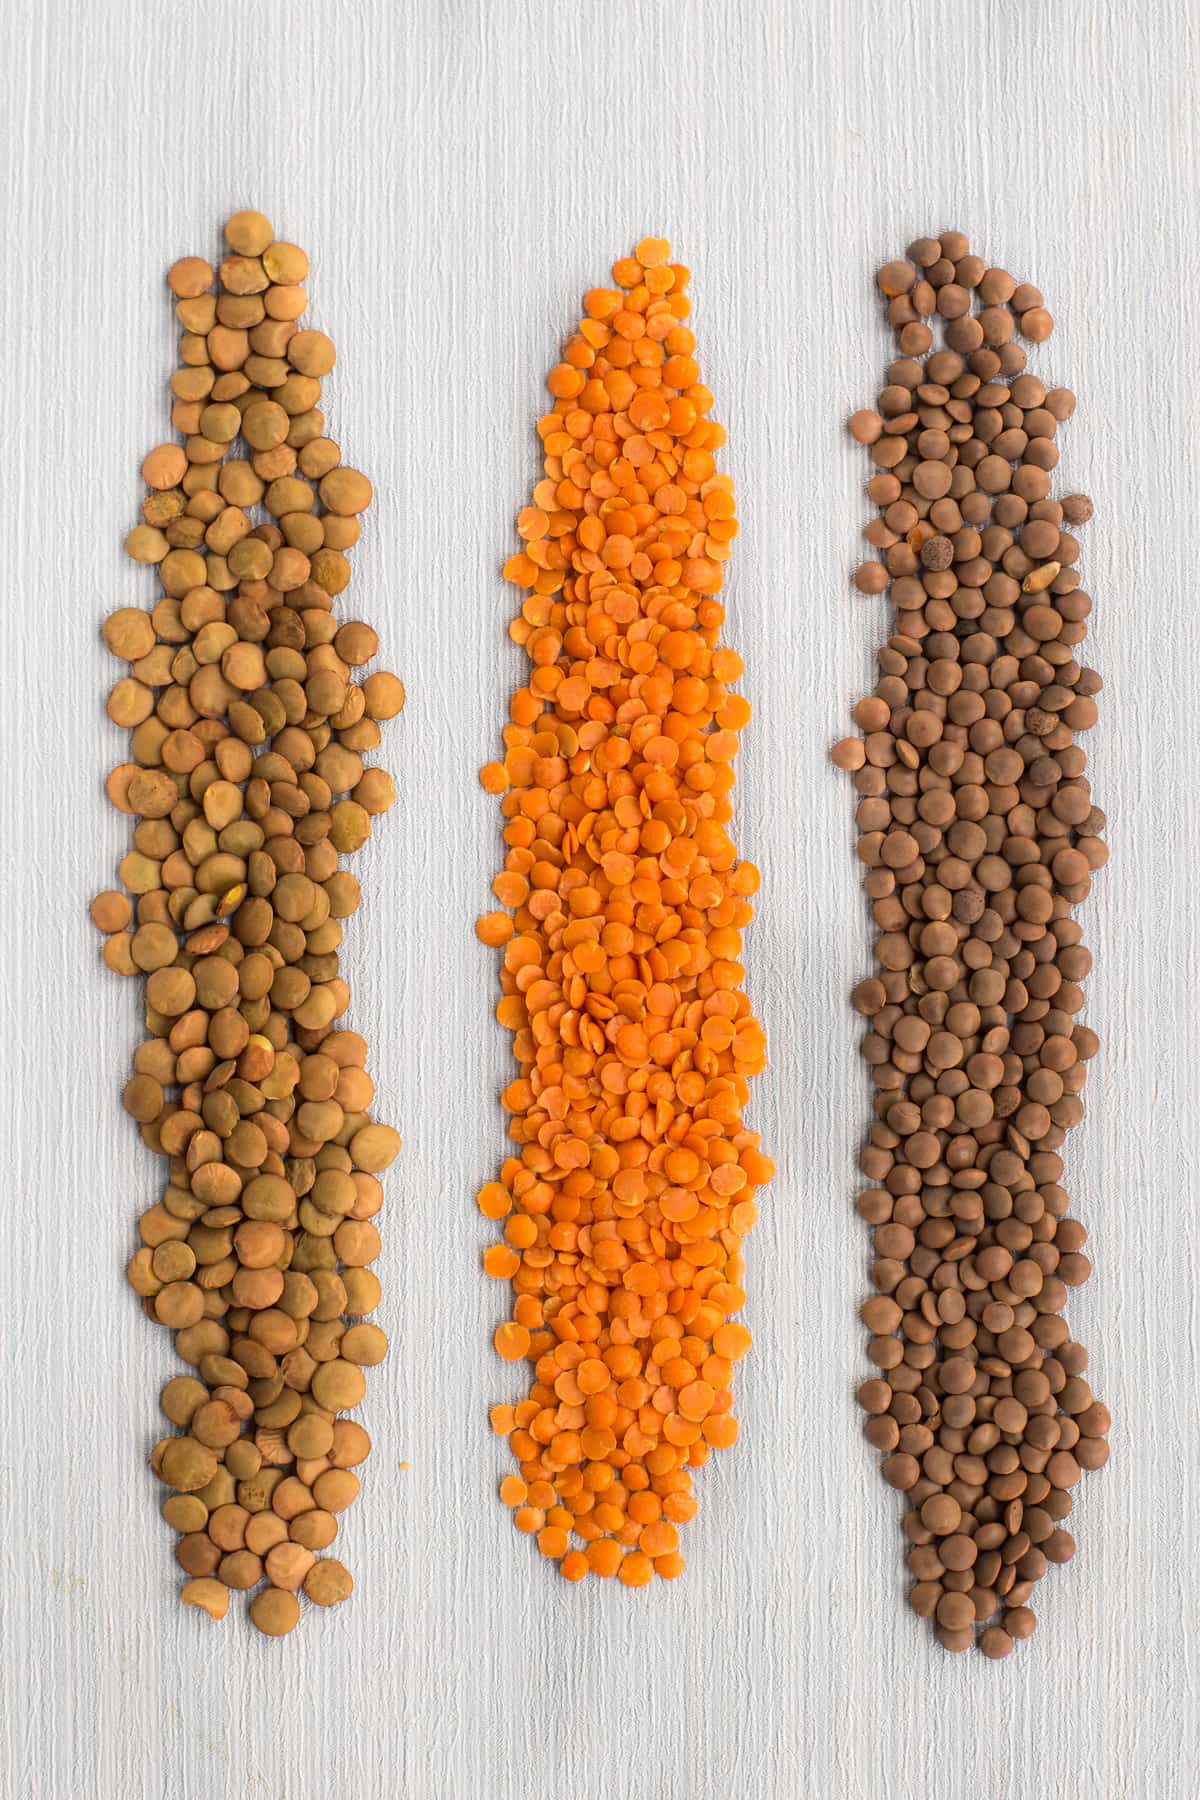 Green, red and brown lentils spread out on a surface to compare the differences.